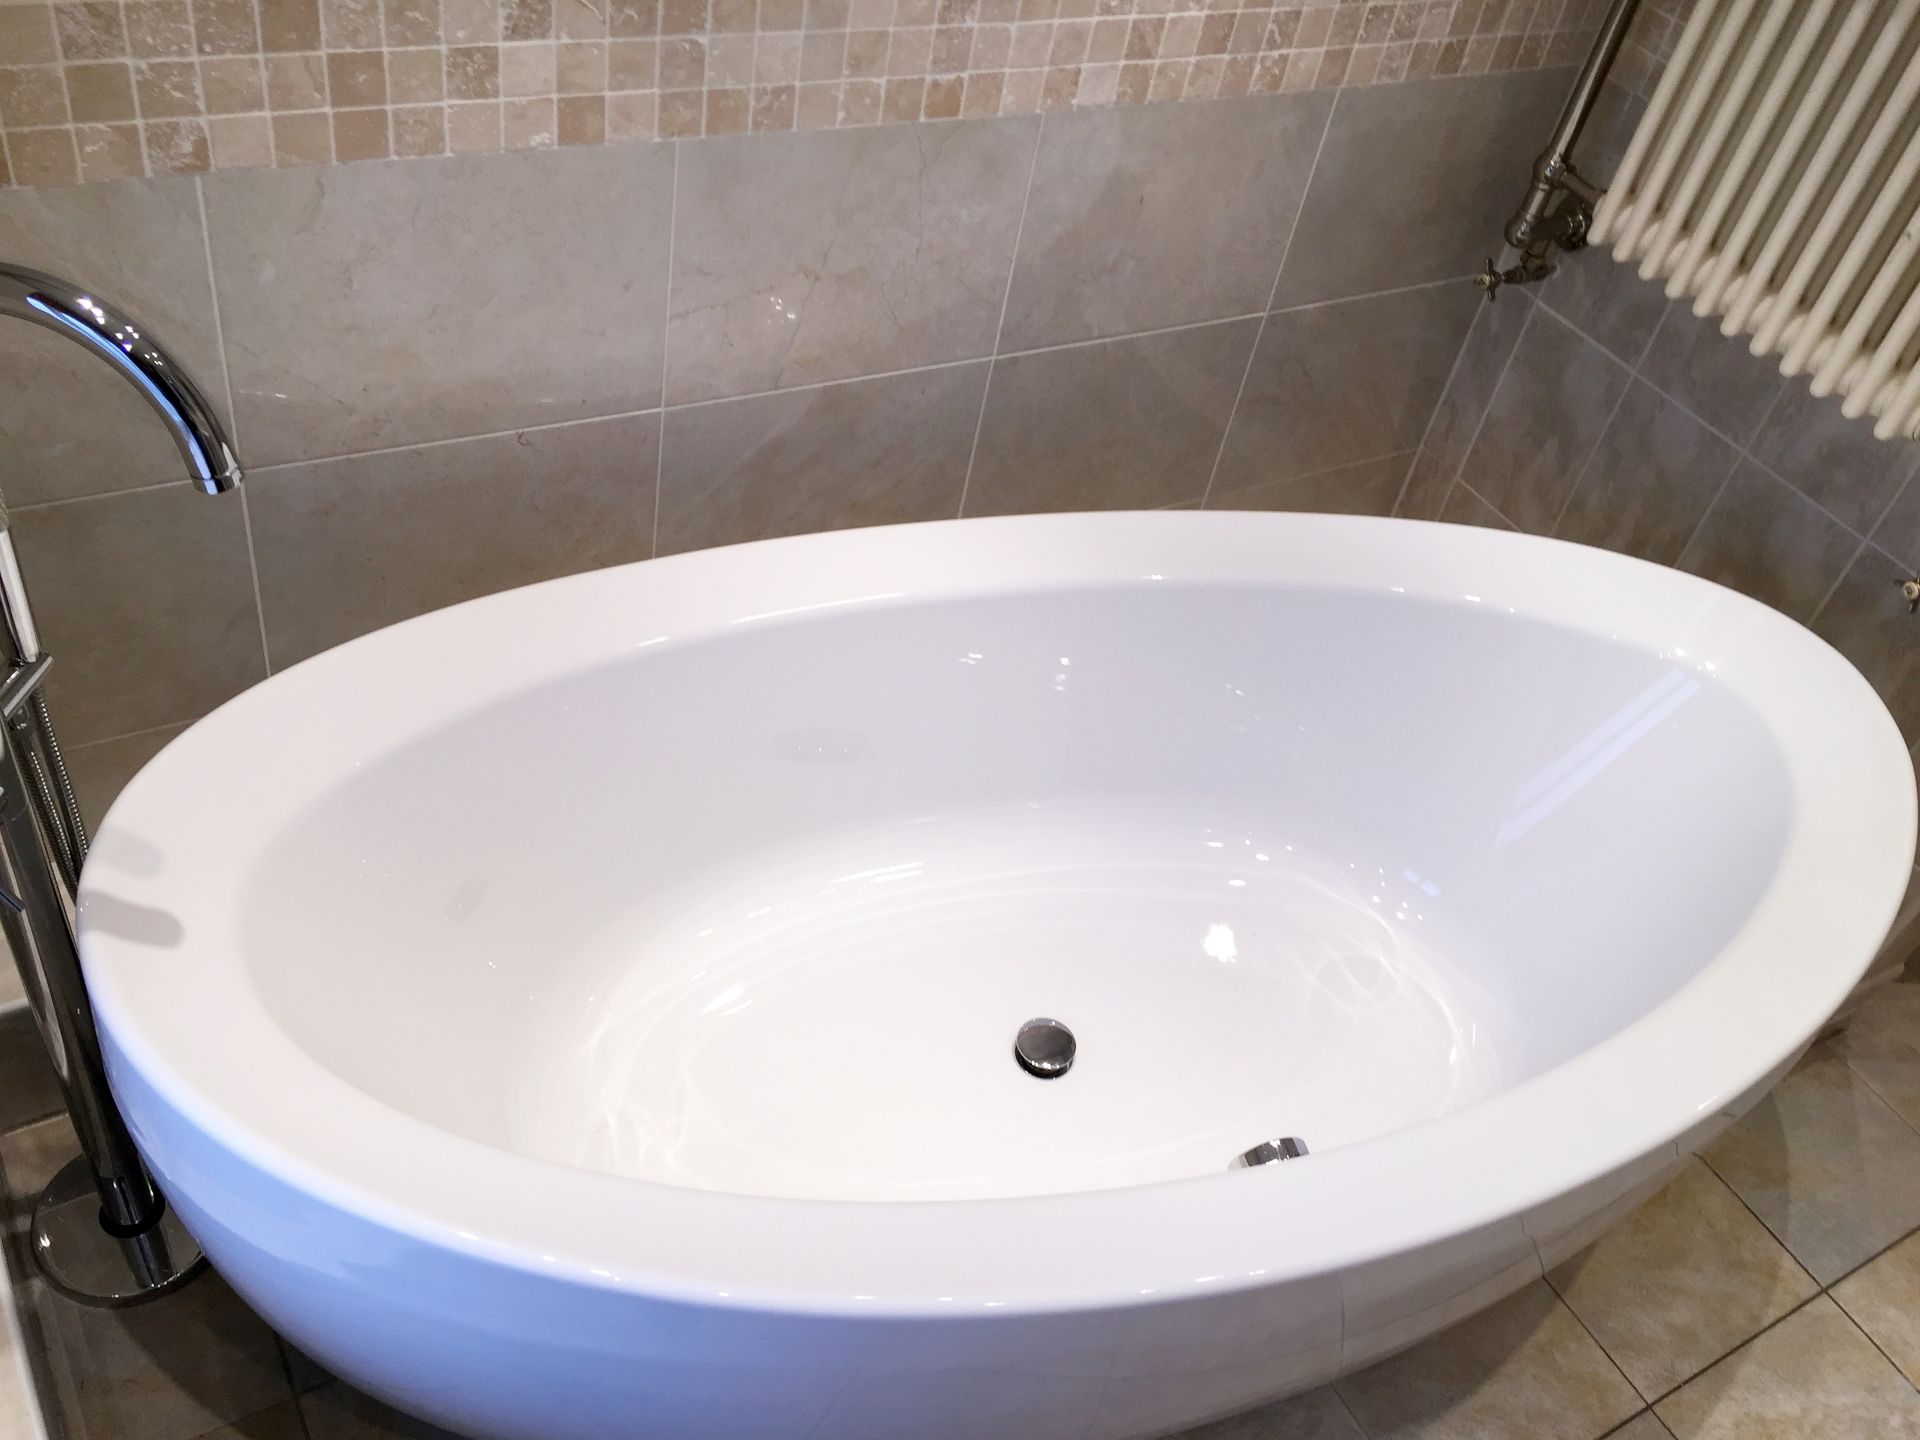 1 x Bath With A Floor Mounted Bath Filler Tap - Preowned In Good Condition - More Information To - Image 3 of 8